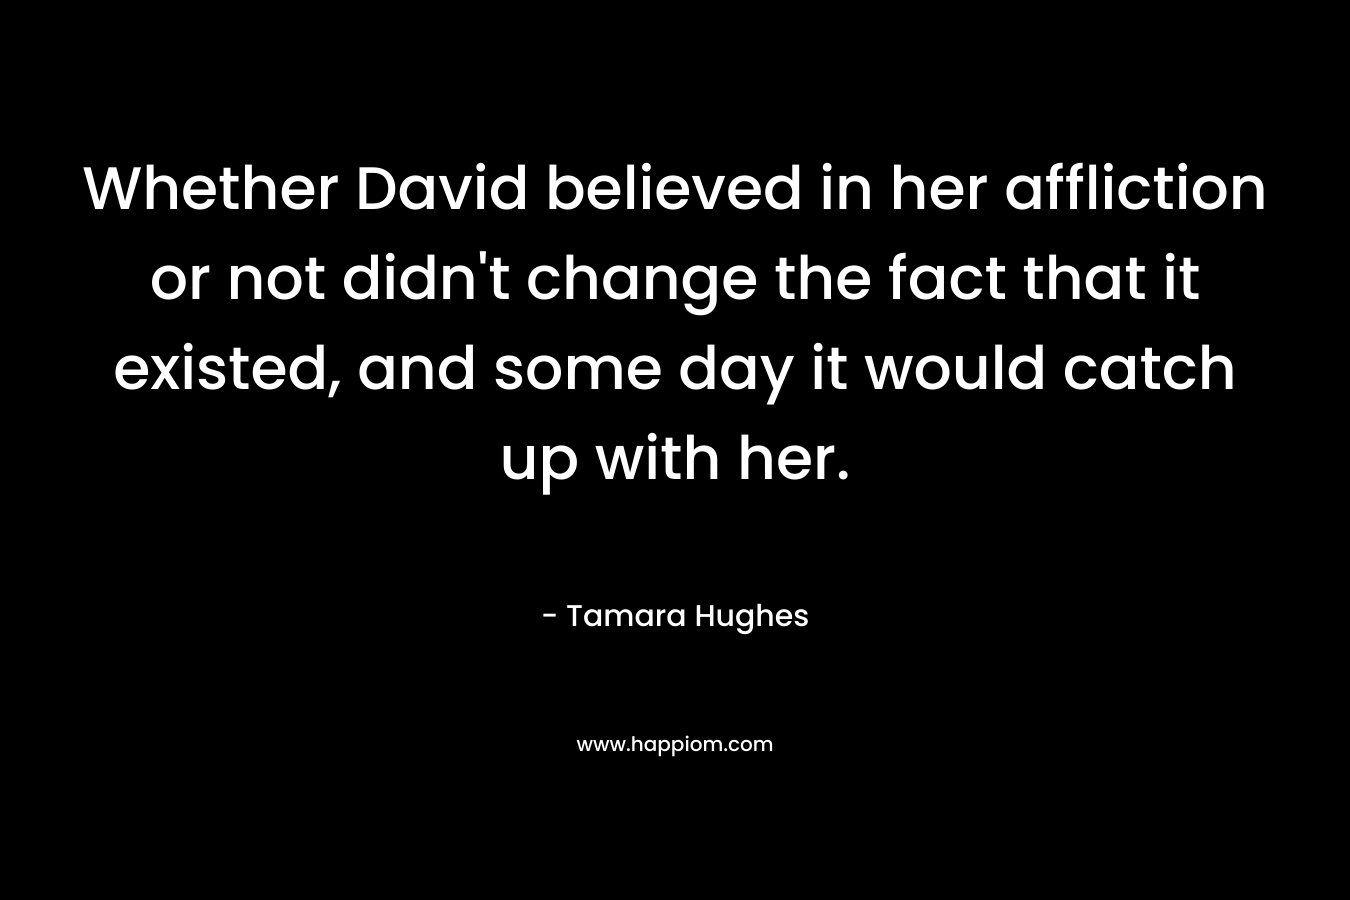 Whether David believed in her affliction or not didn’t change the fact that it existed, and some day it would catch up with her. – Tamara Hughes